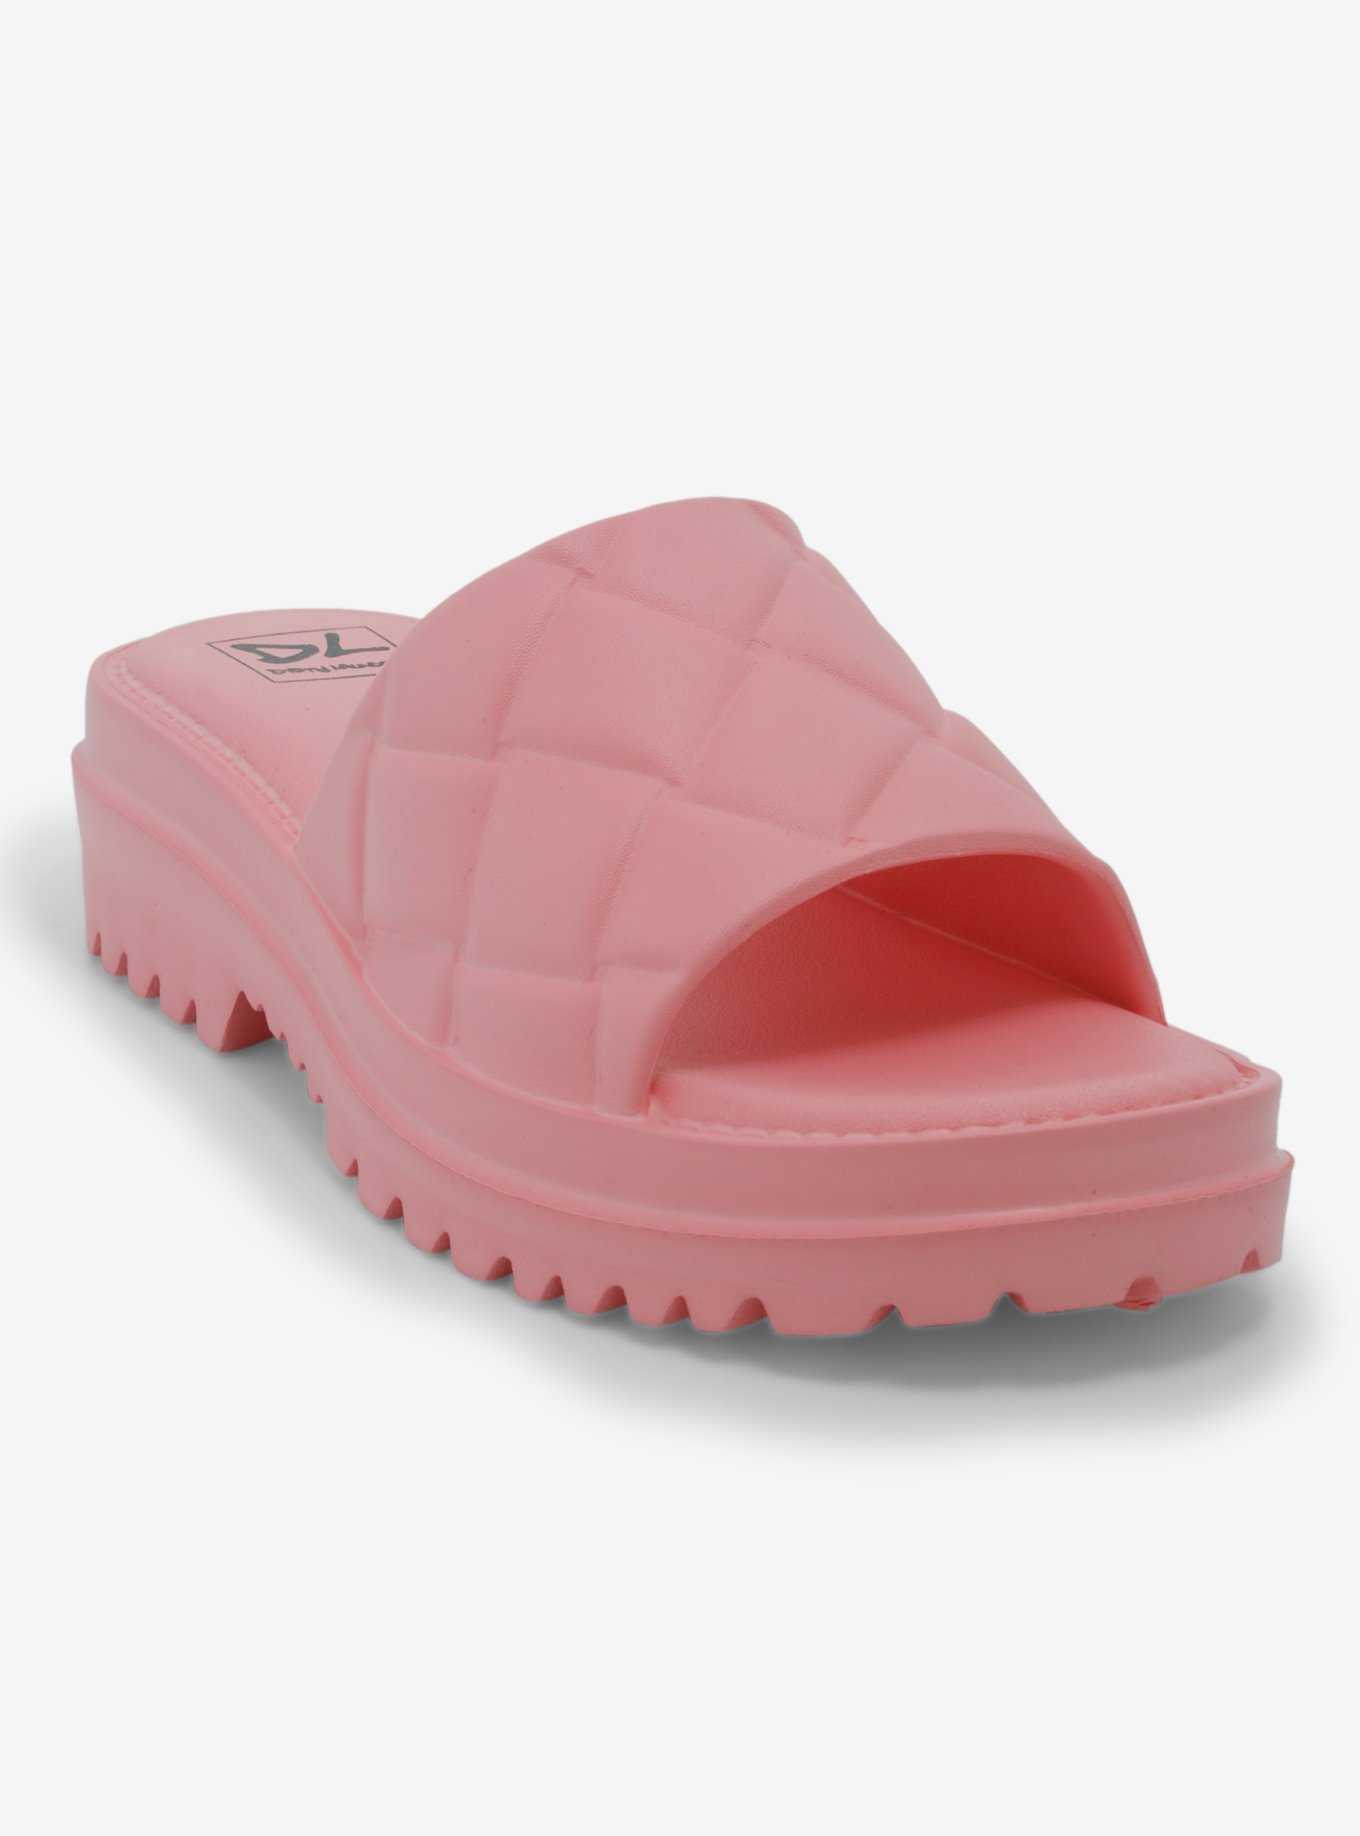 Dirty Laundry Pink Foam Chunky Sandals, , hi-res